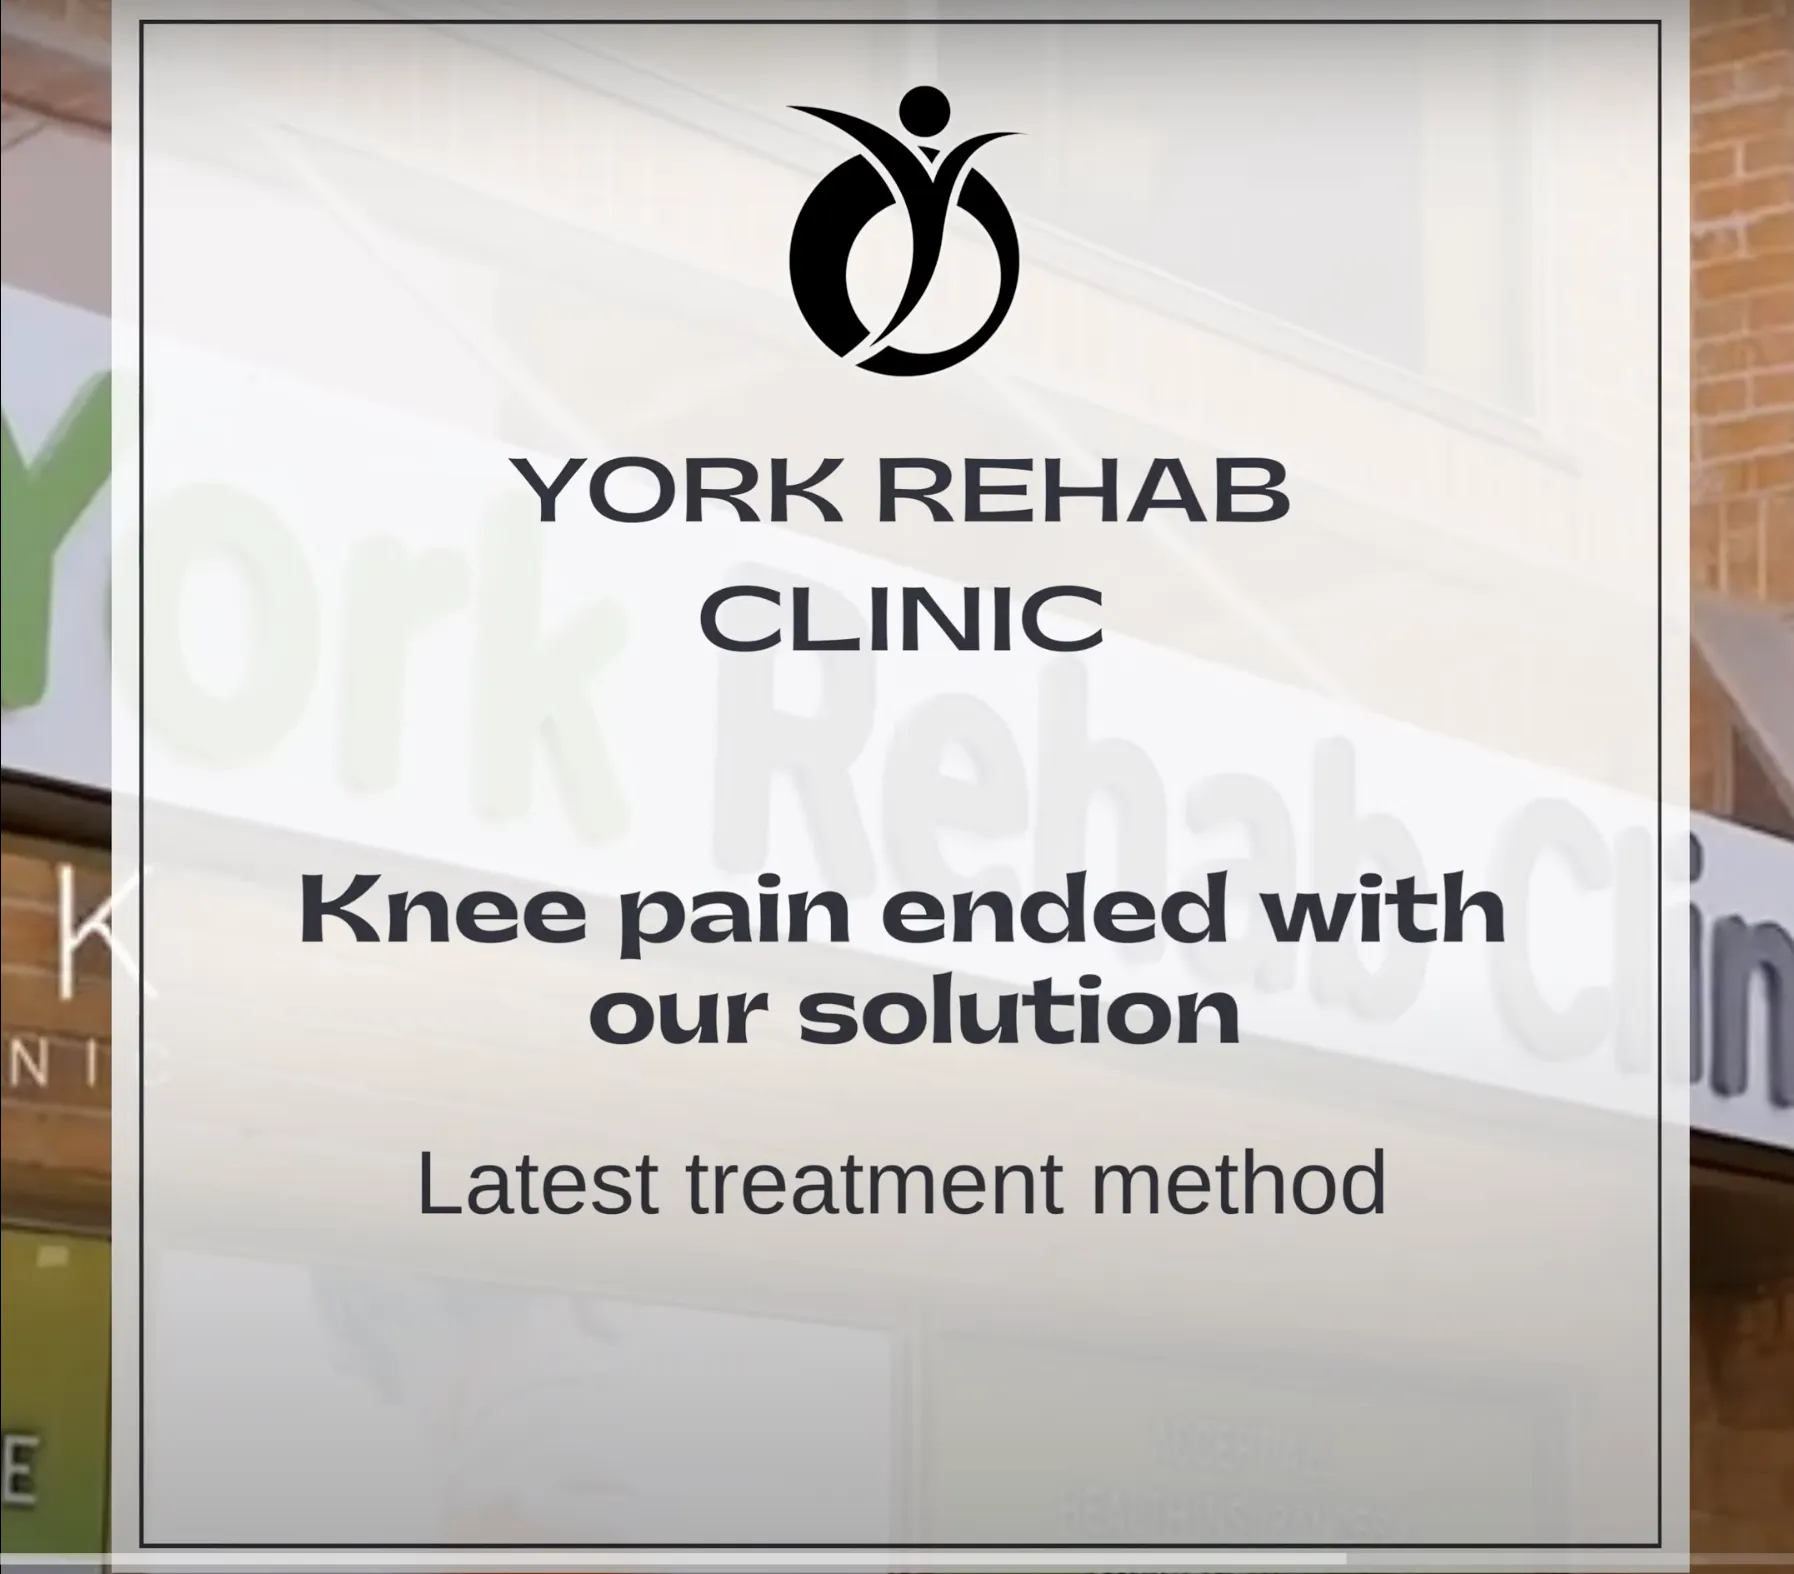 Knee pain ended with our solution